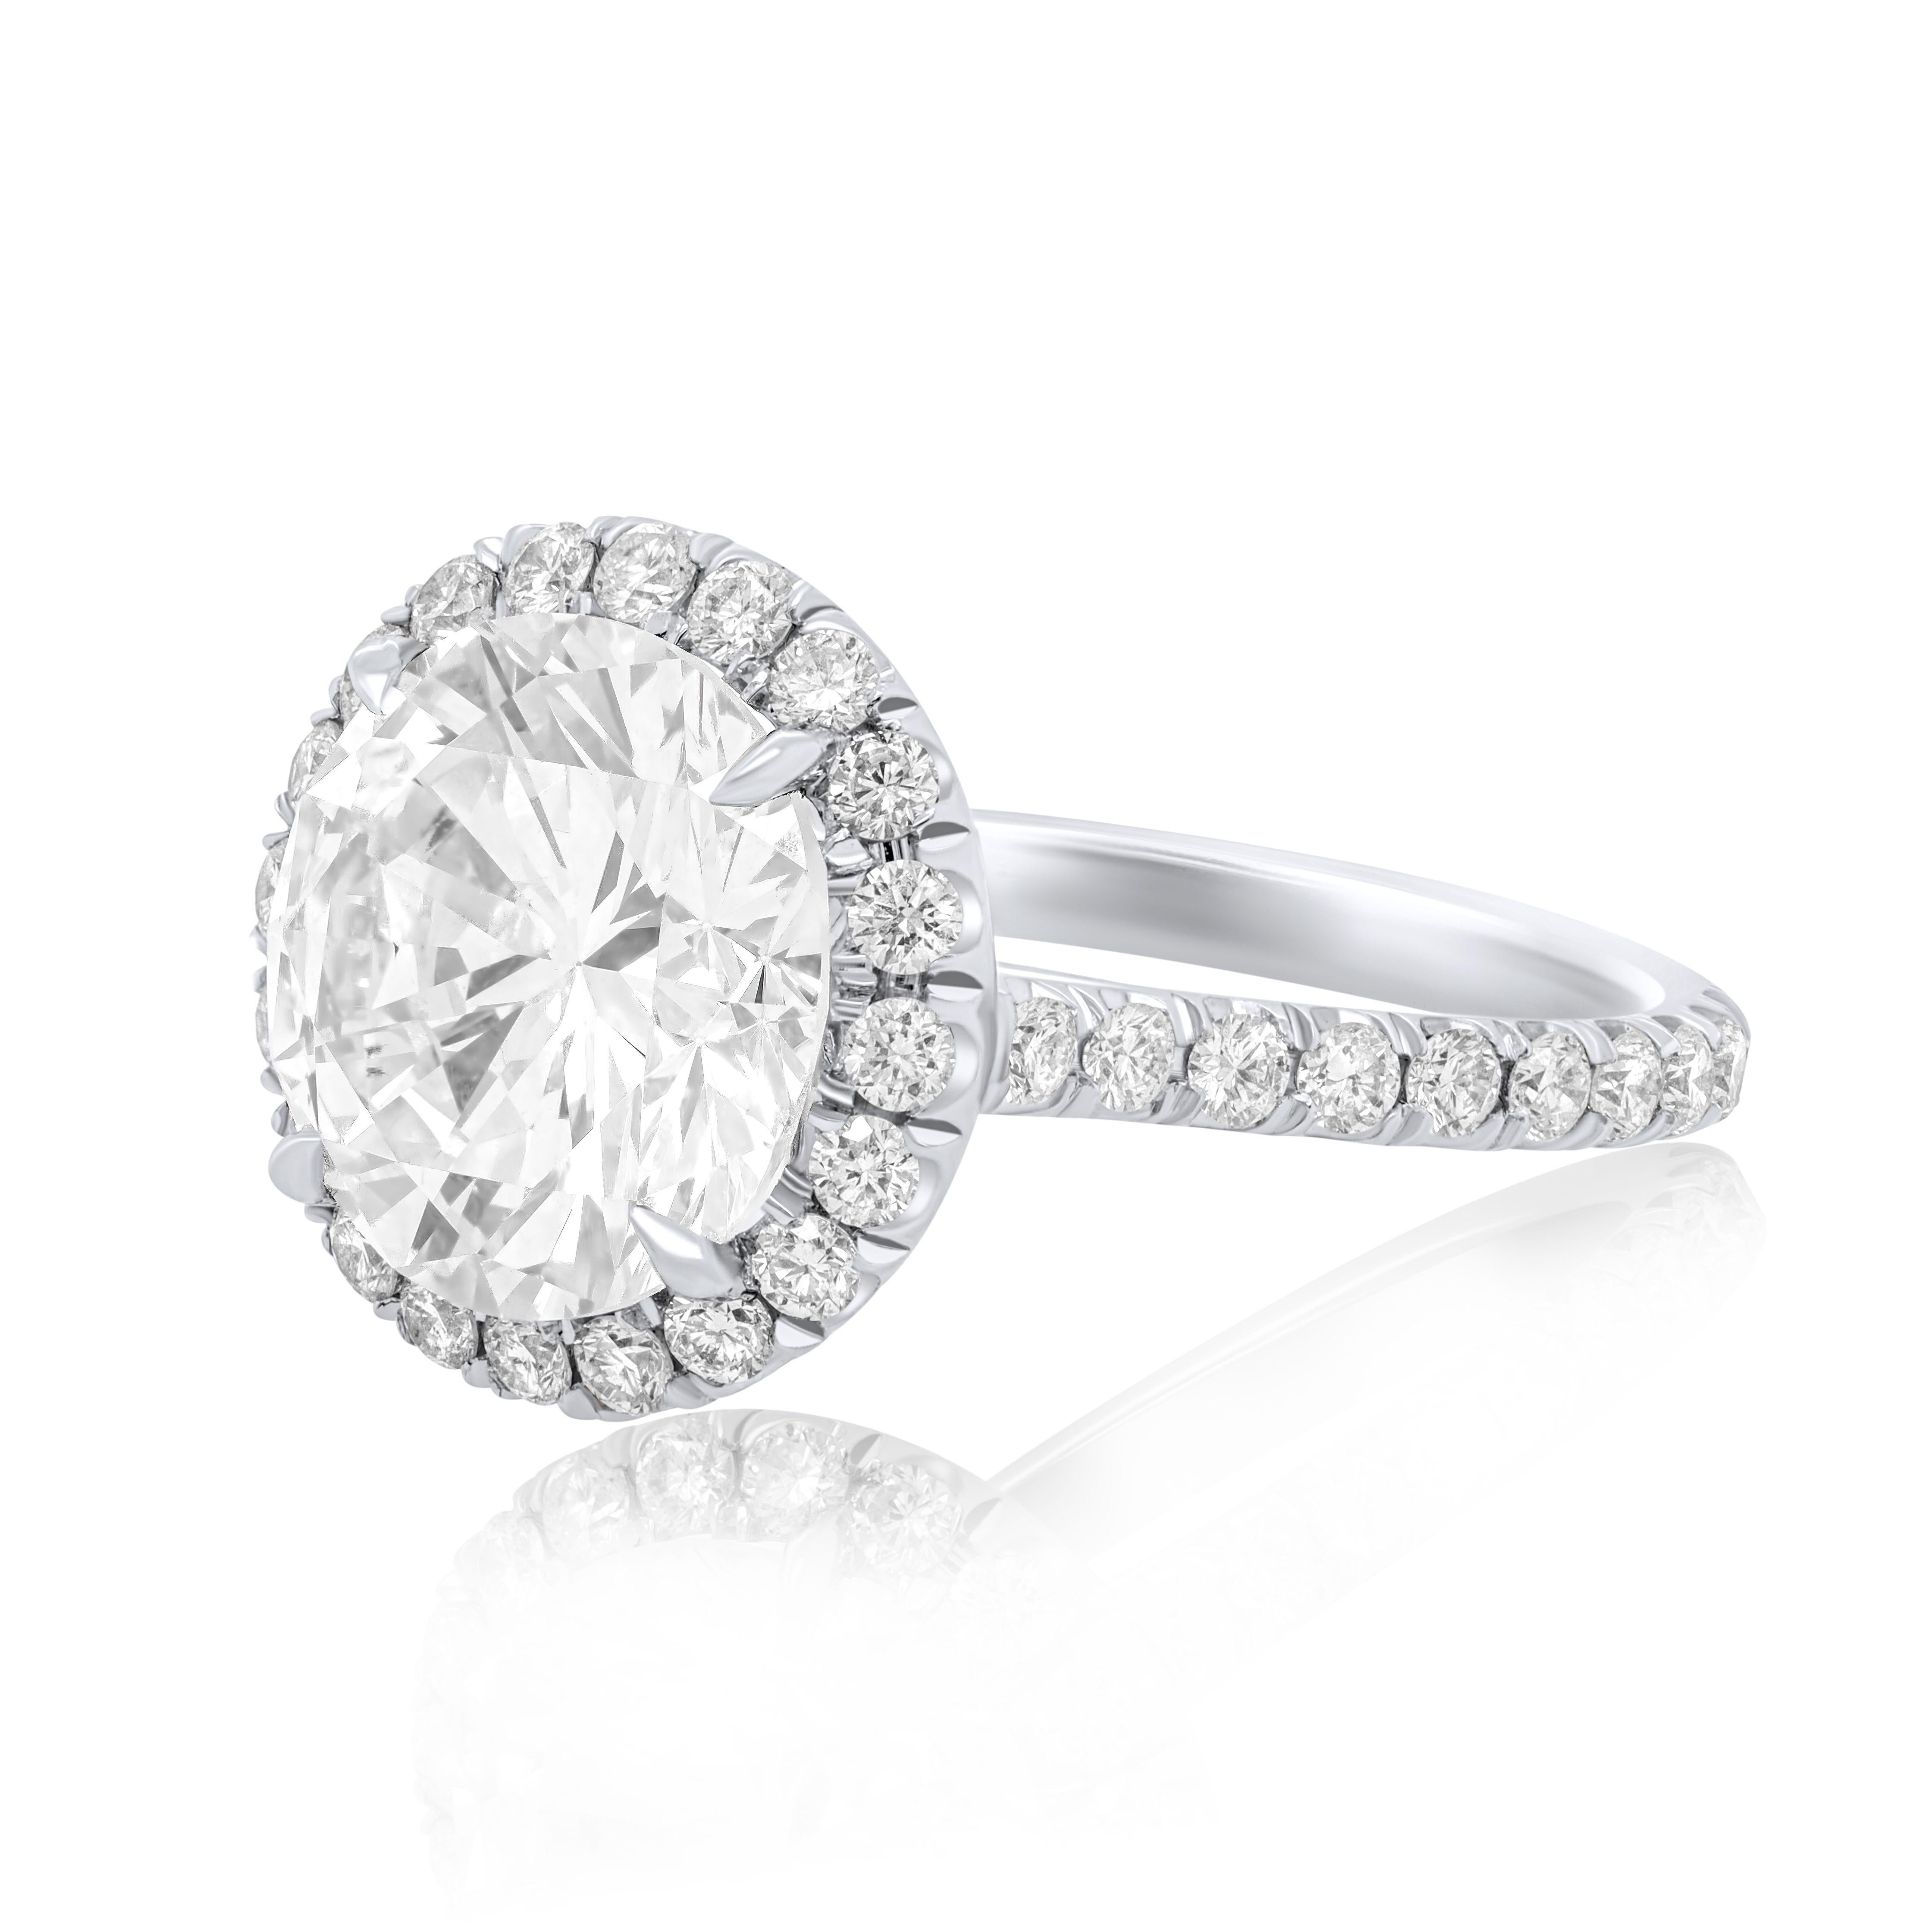 Round Cut 4.54 Carat Diamond Ring in Platinum Setting with Micropave Diamonds For Sale